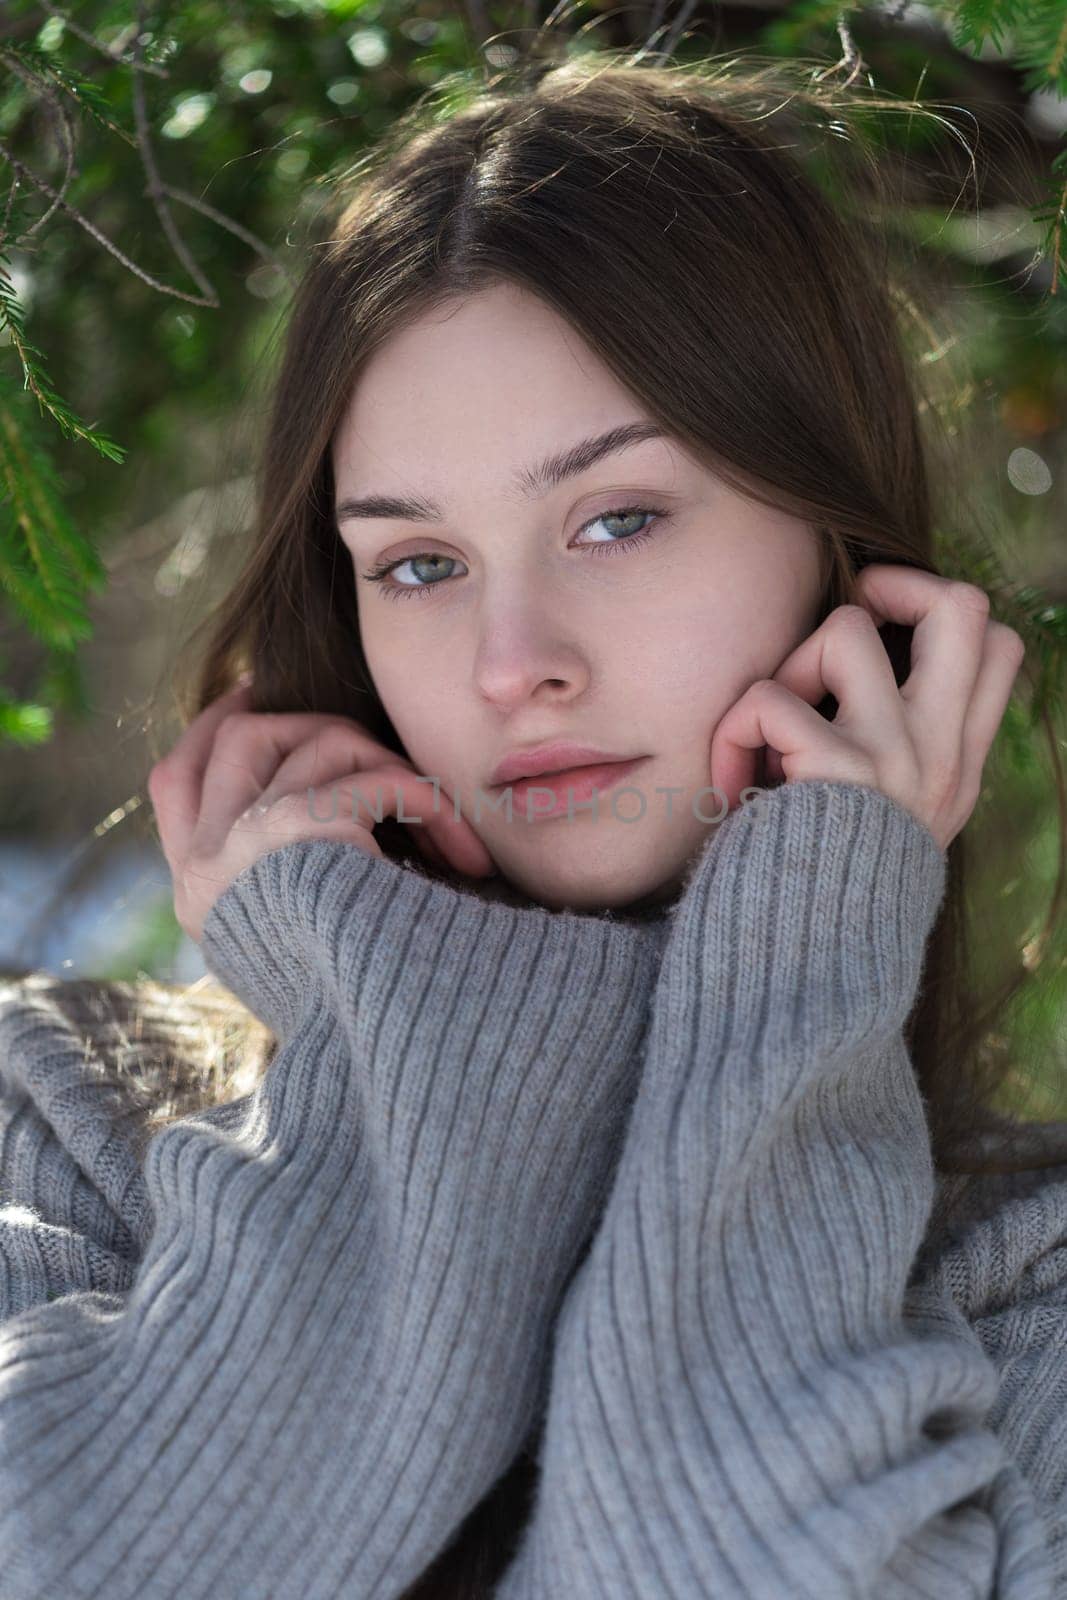 Headshot of teen girl 17 year old looking at camera, raised hands to face on natural background in pine forest. Portrait of brunette teenager female with long hair and no make-up, wearing gray sweater